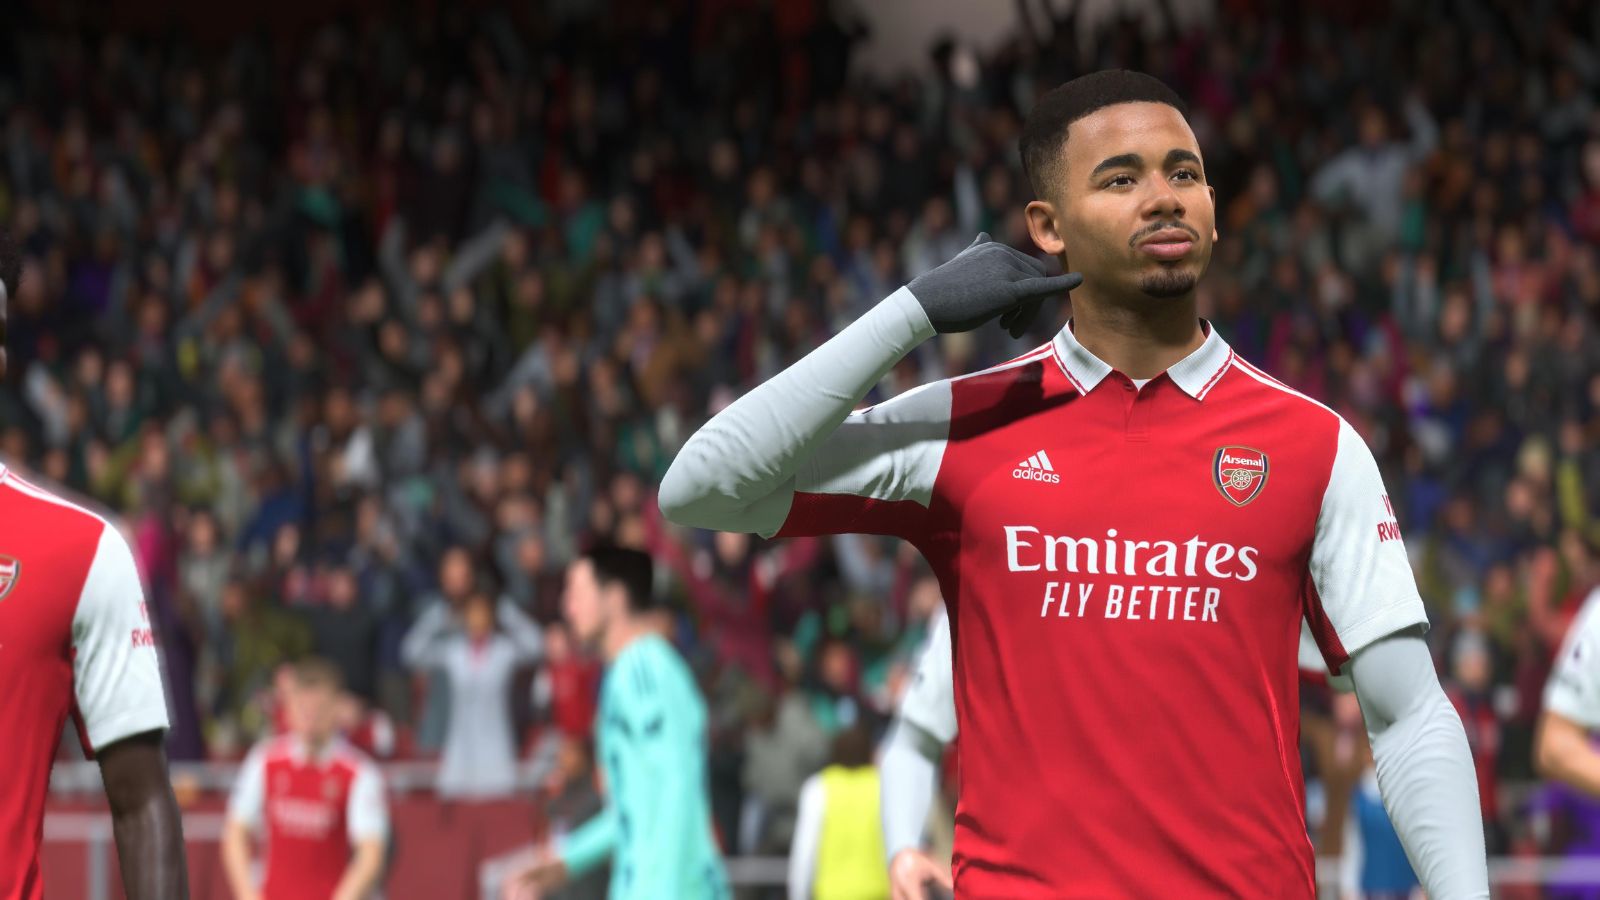 FC Mobile: Release date, cover athlete, new features & everything we know -  Dexerto